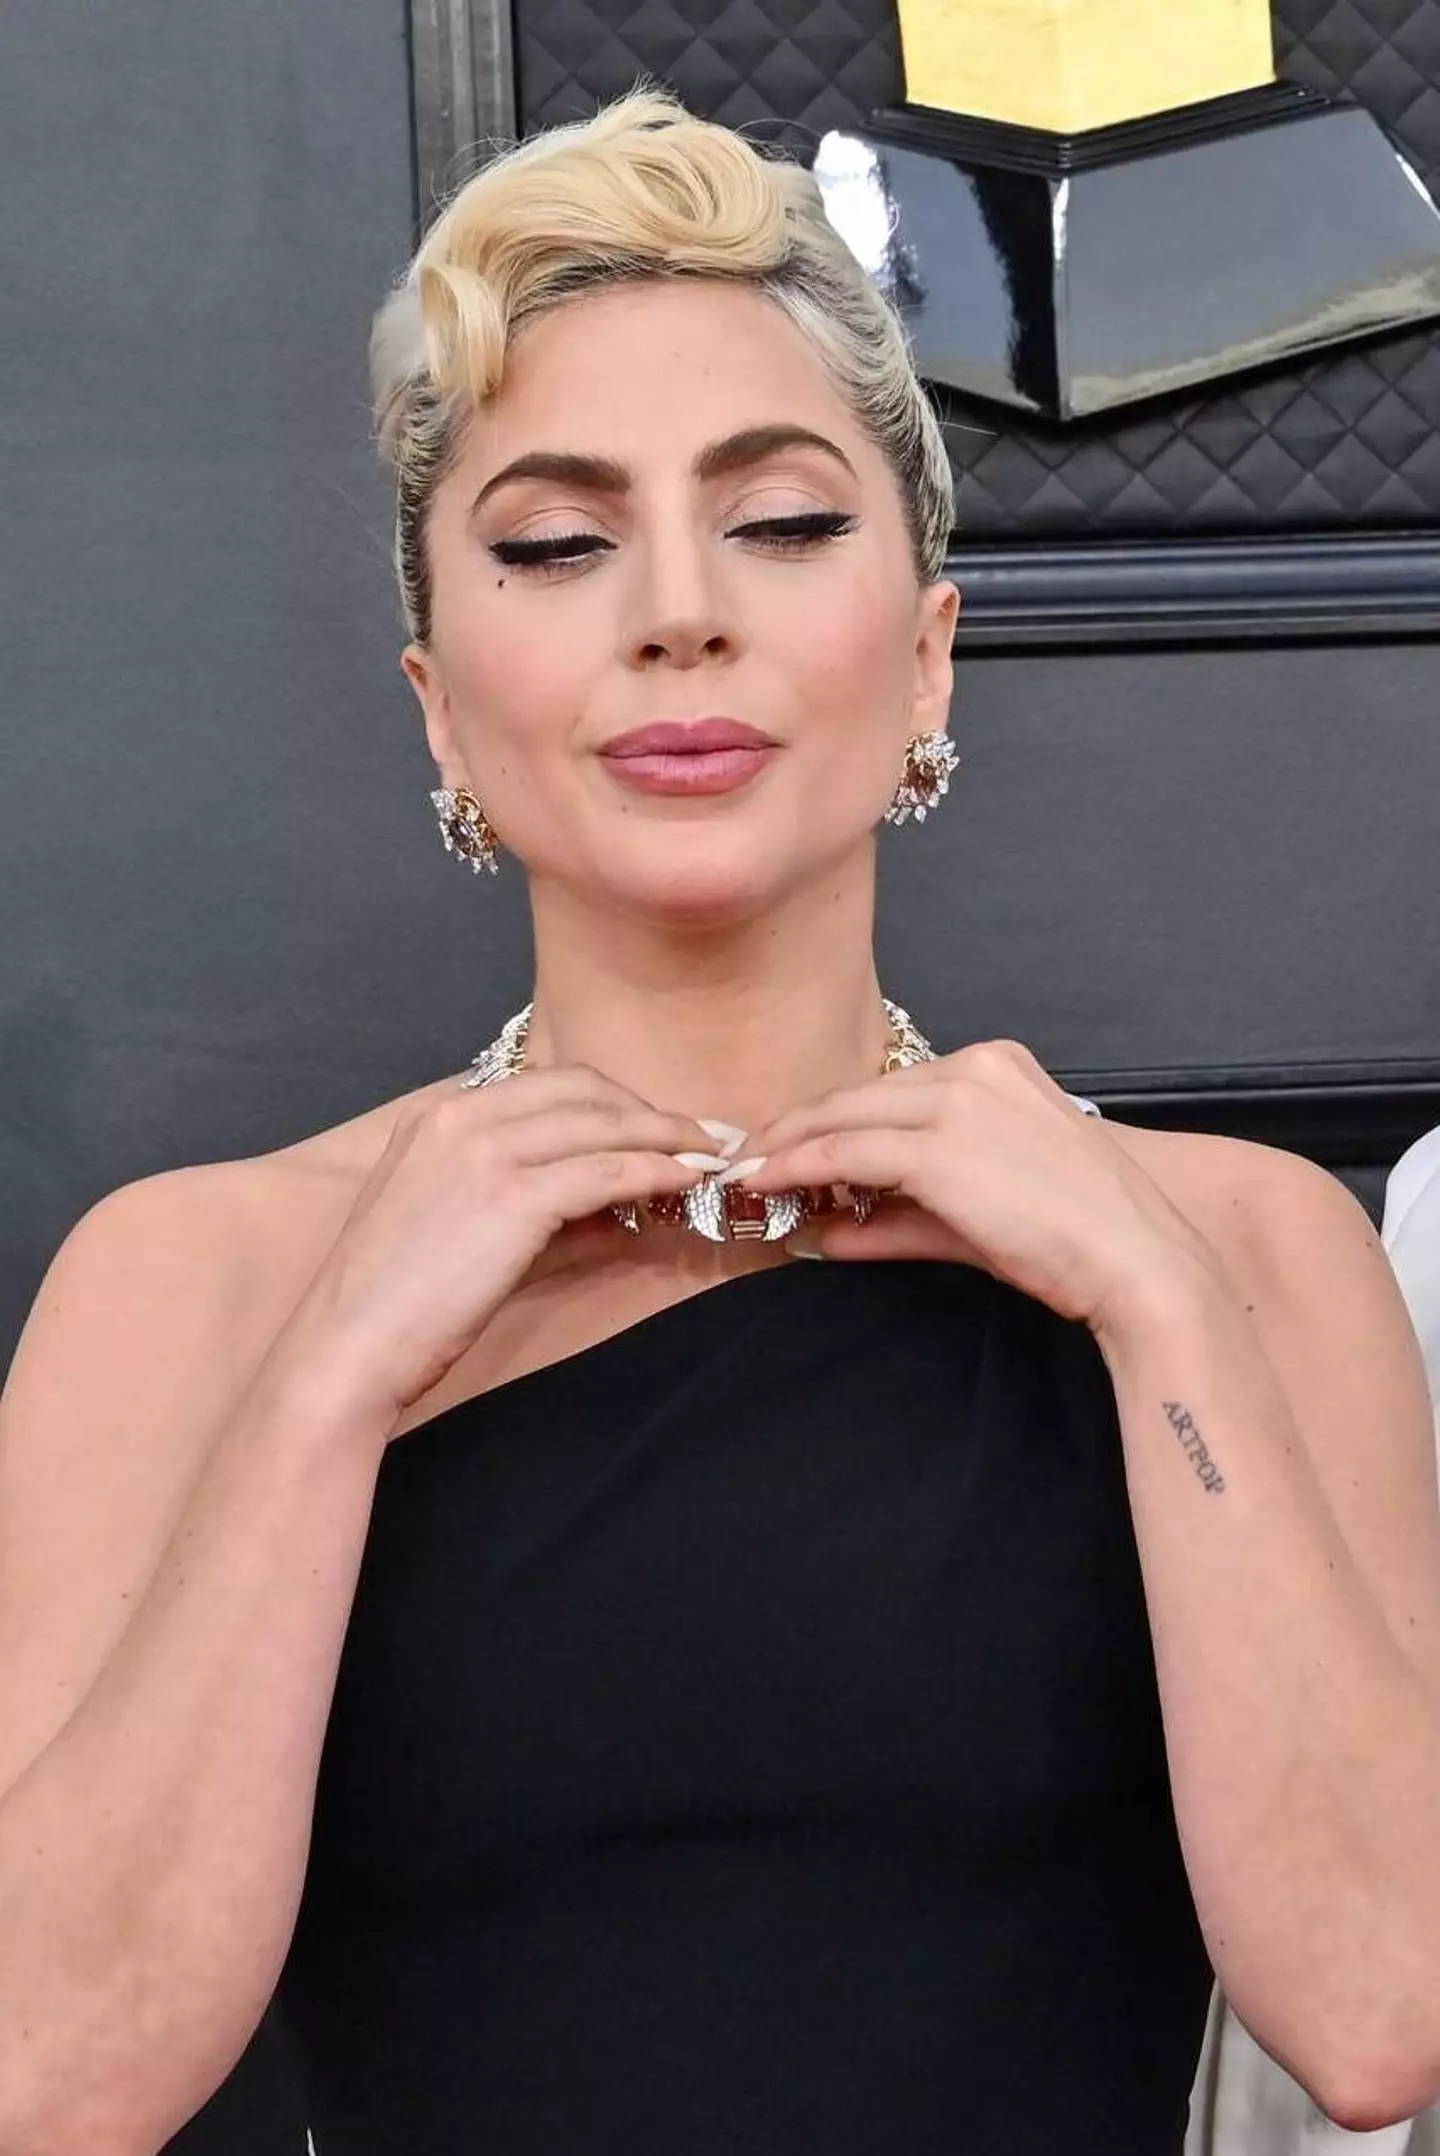 We can't wait to see Gaga back on our screens.